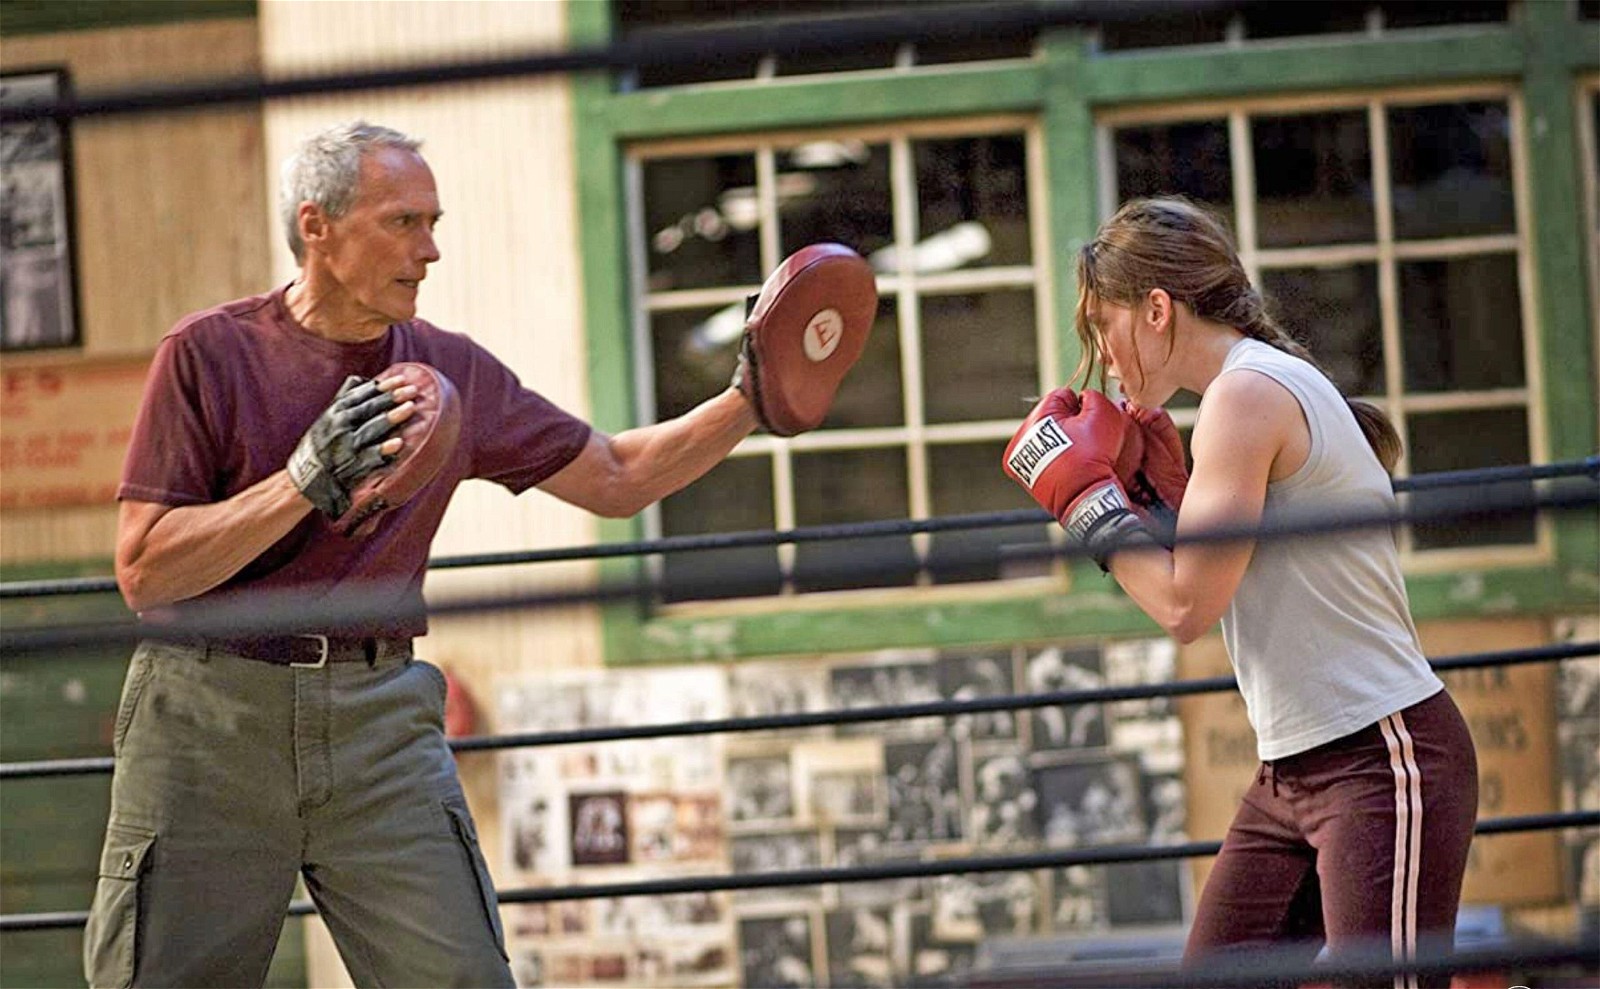 Clint Eastwood and Hilary Swank in a still from Million Dollar Baby 